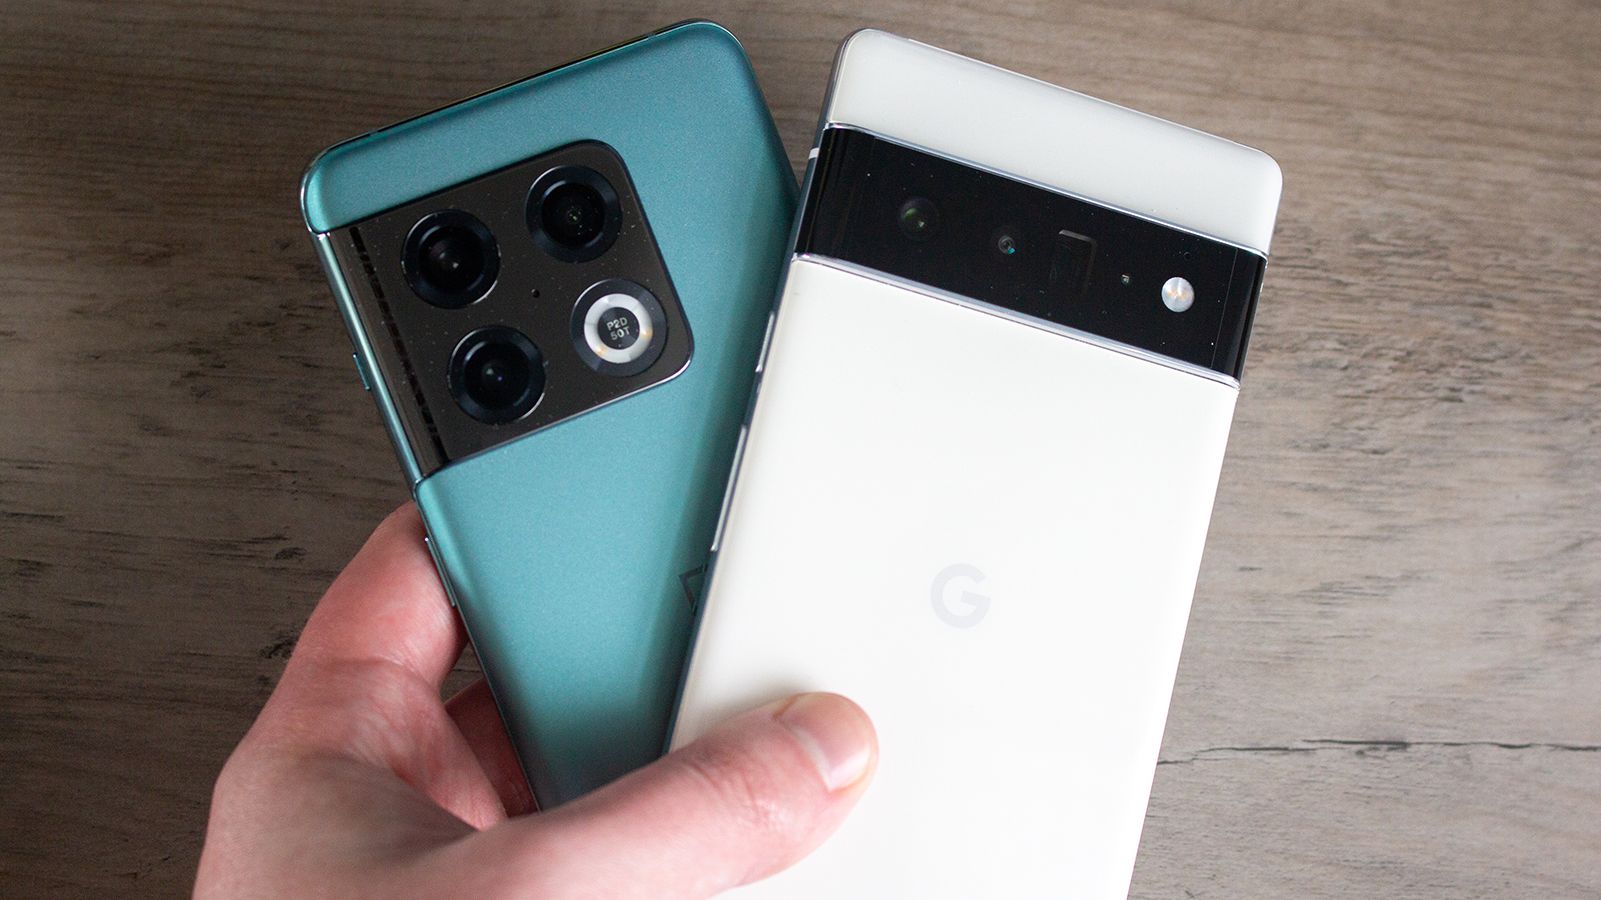 Google Pixel 6 and Pixel 6 Pro camera specifications emerge -   News